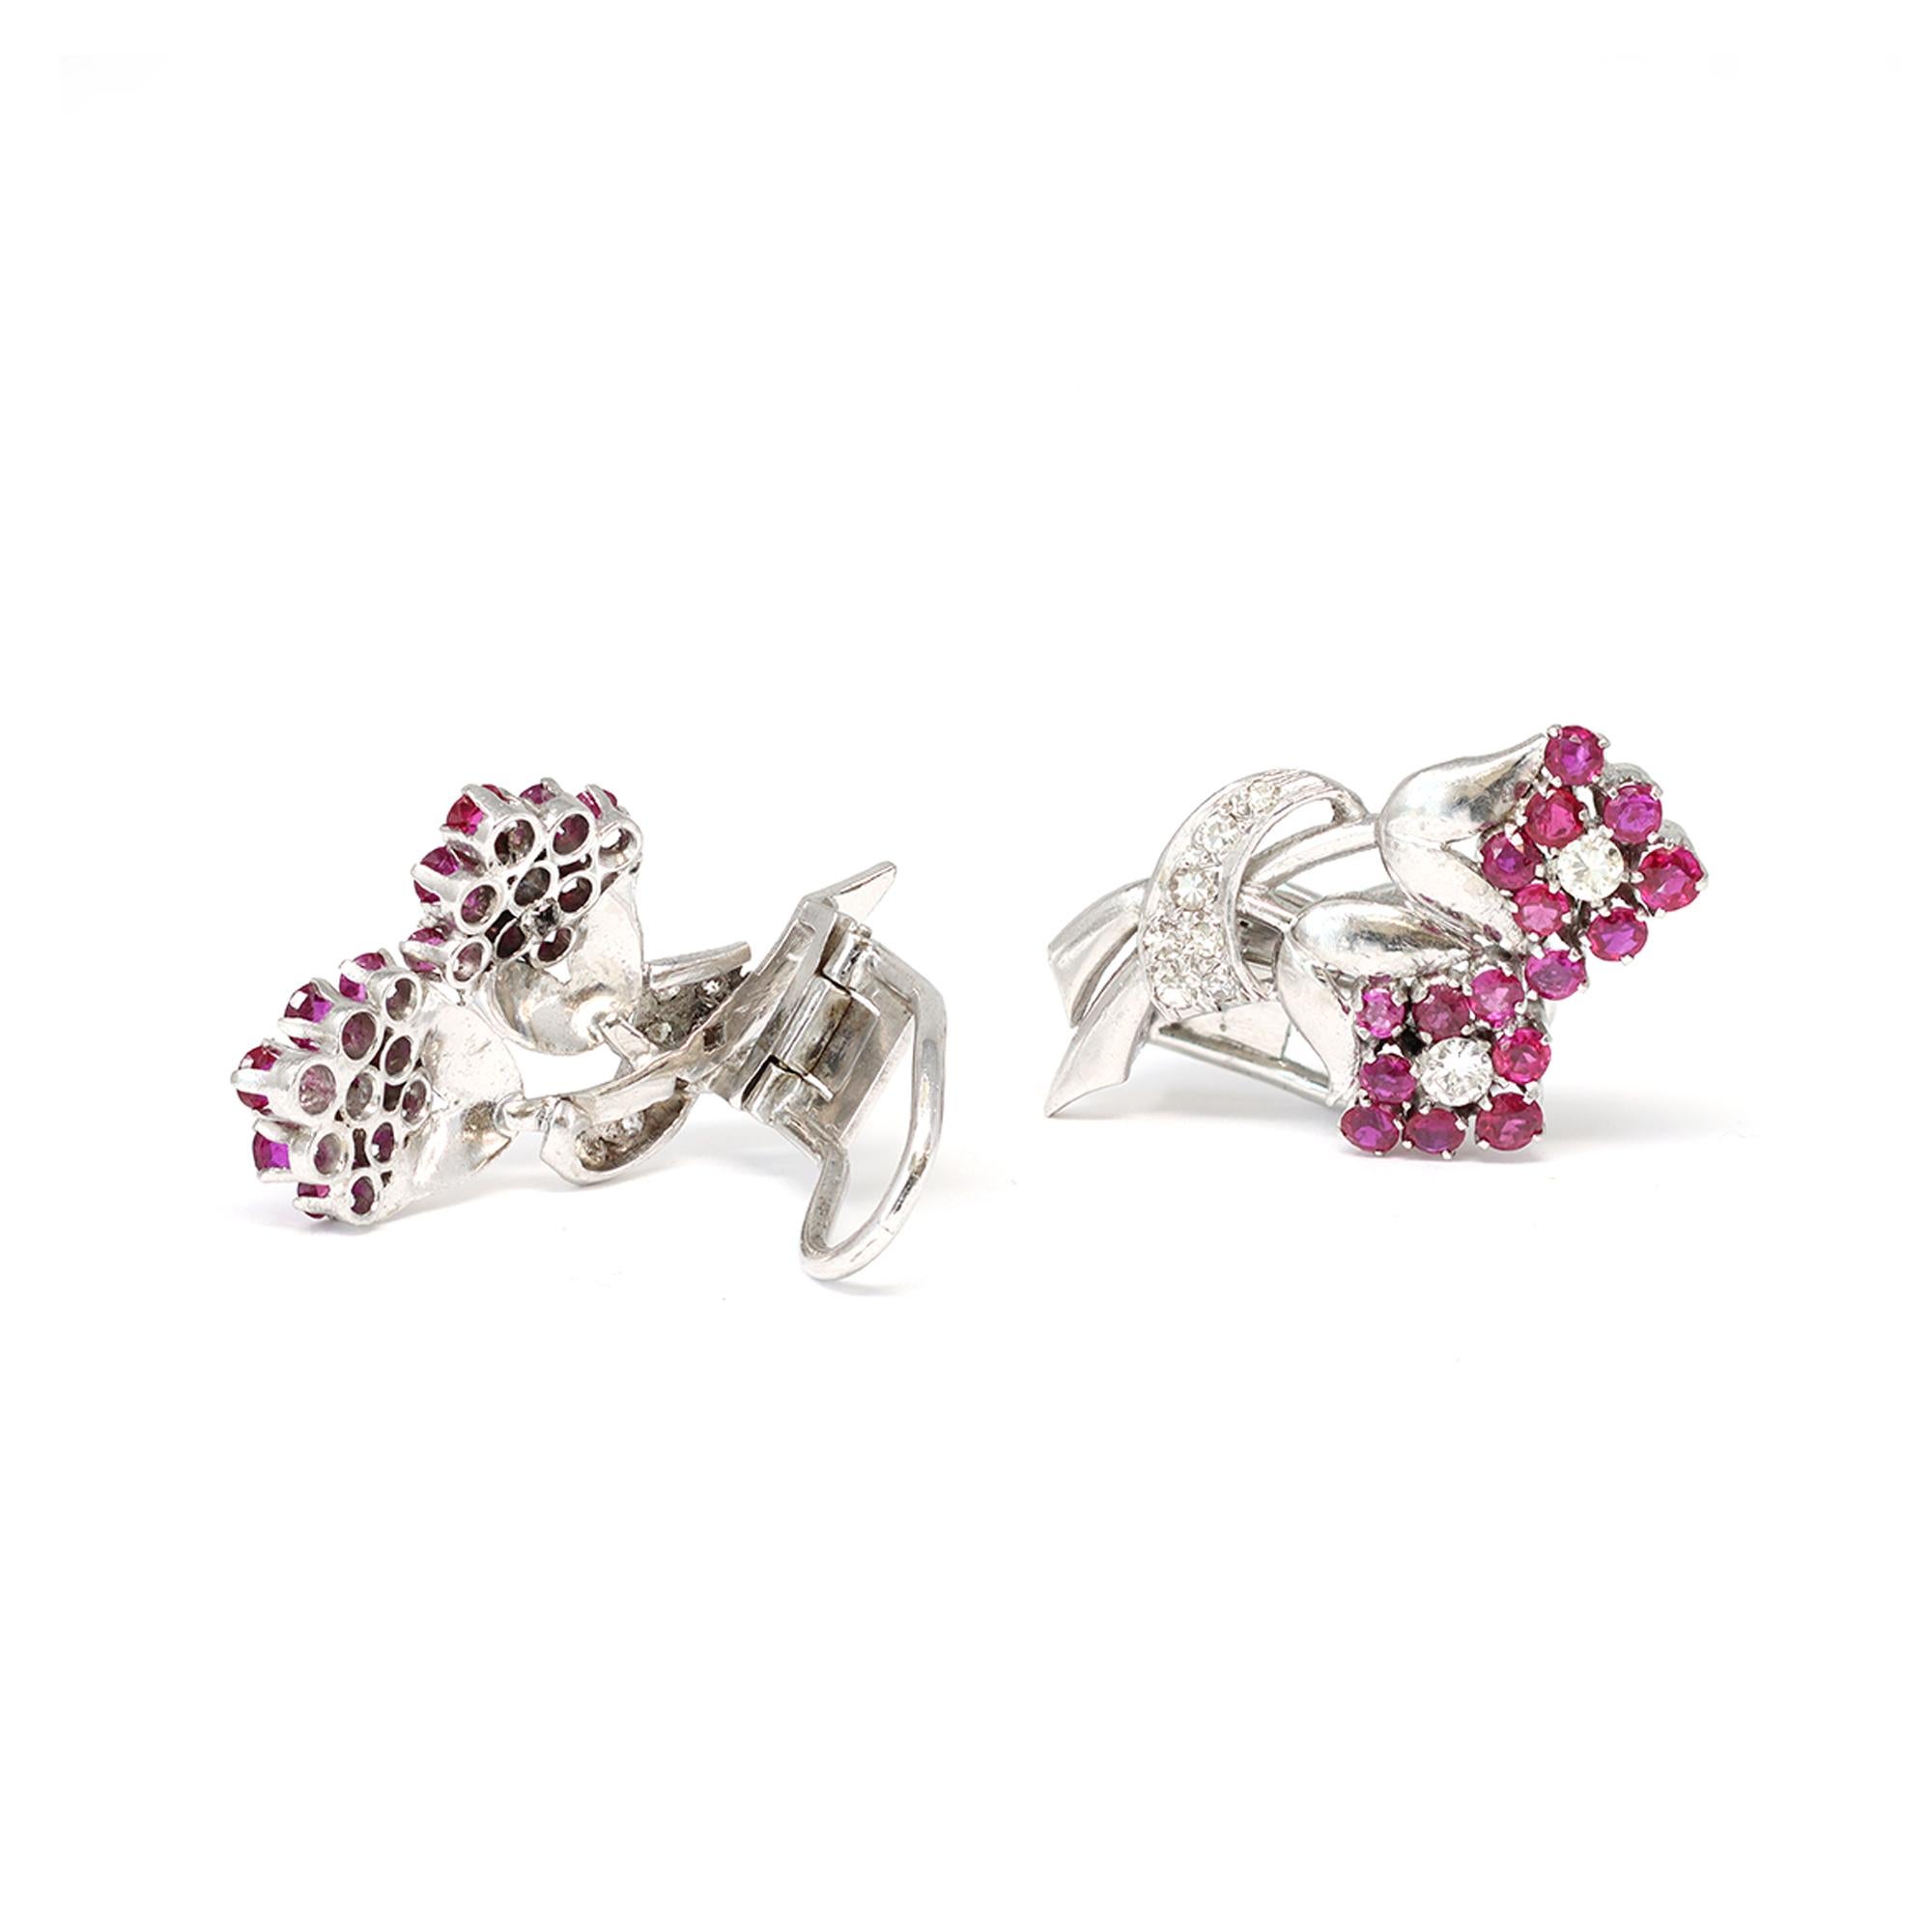 An elegant clip on earrings circa 1950 featuring tiny flowers made of round rubies and diamonds. Styled in Platinum, the diamonds have an estimated weight of 0.70 carats, GH color and VS clarity. The vibrant red rubies have an approximate weight of